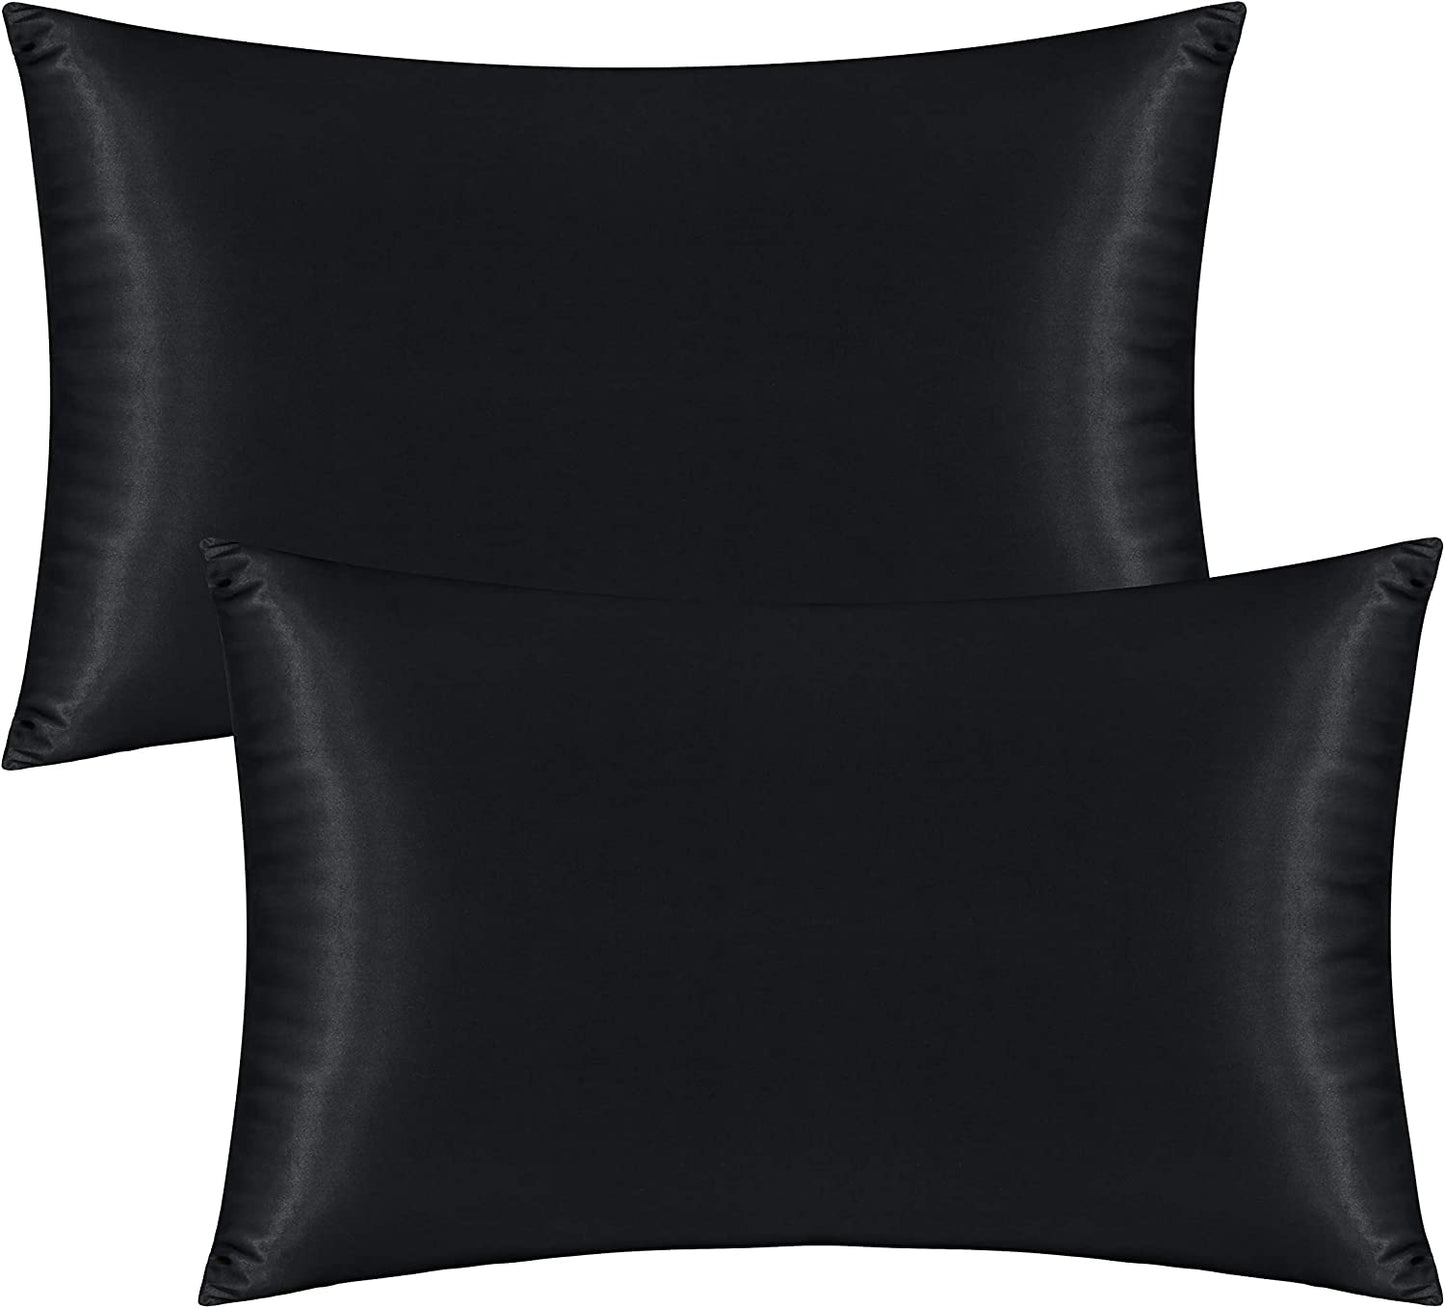 Exclusivo Mezcla Satin Pillowcase for Hair and Skin, 2 Pack Queen Size Silky Pillowcases with Envelop Closure, (Black, 20”X30”